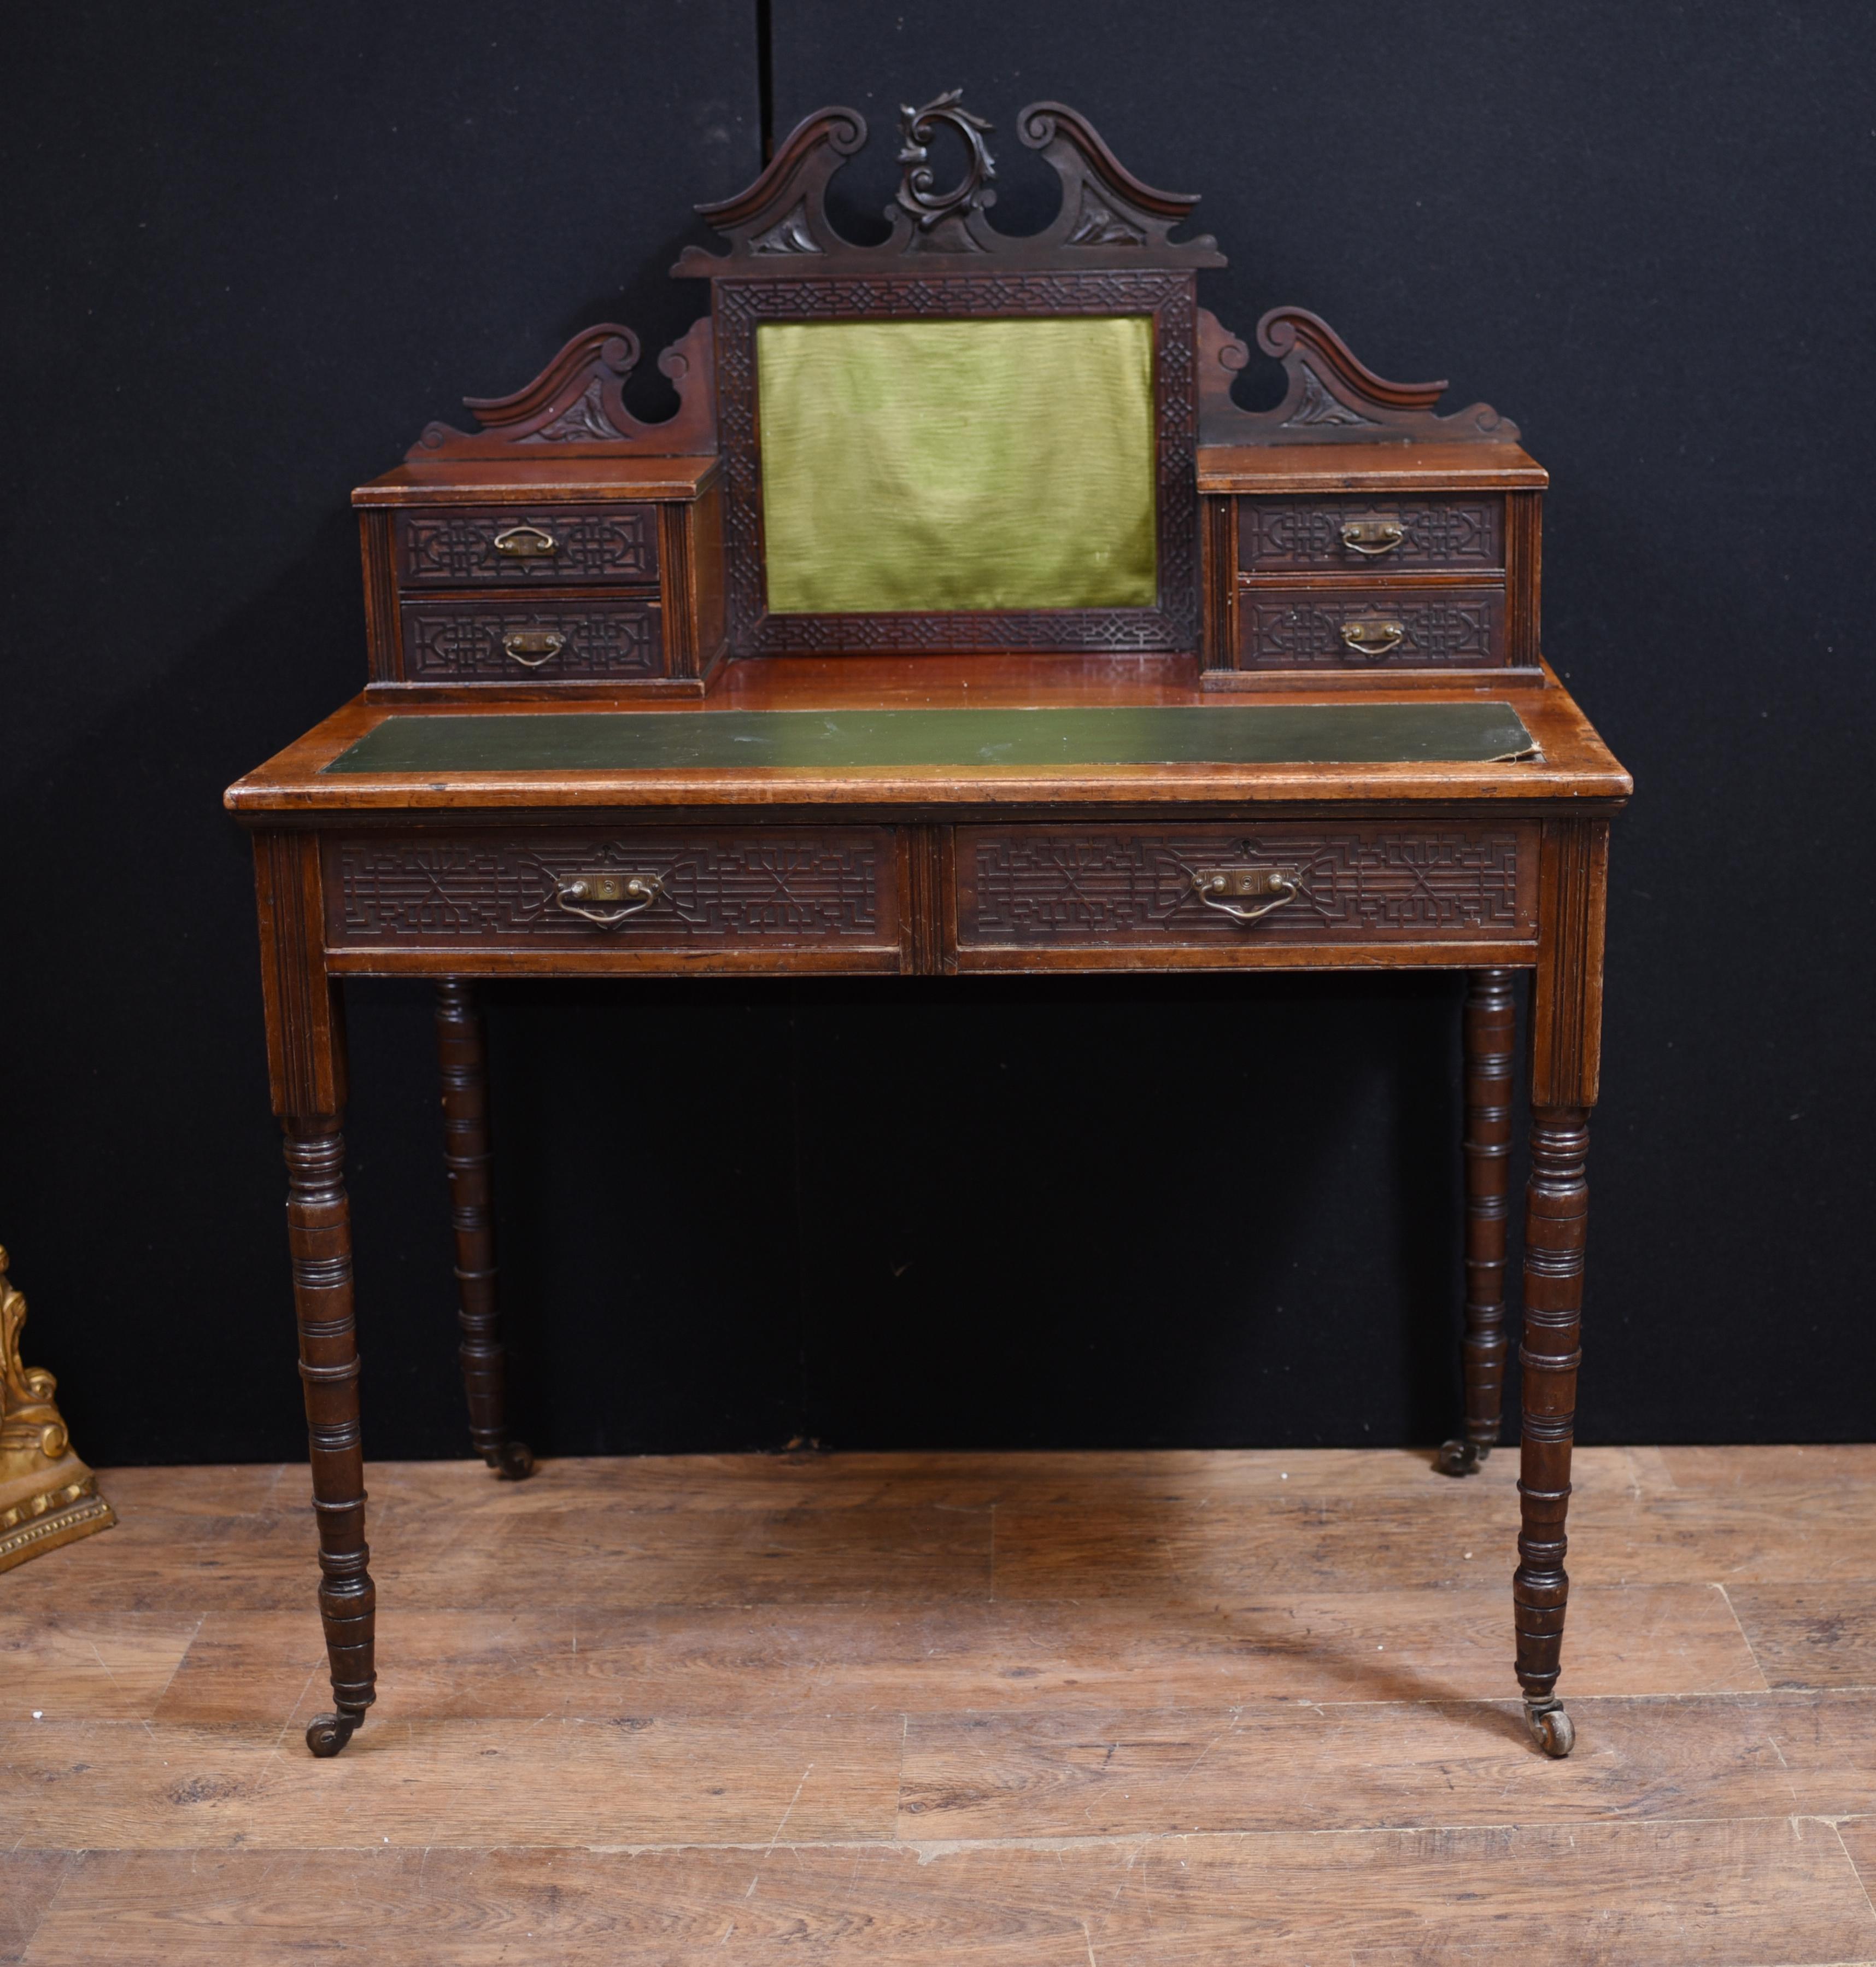 - Wonderful French antique ladies desk in walnut
- Circa 1890
- Hand carved details on drawers wonderful
- Purchased from a dealer on Marche Biron at Paris antiques markets
- Offered in great shape ready for home use right away
- We ship to